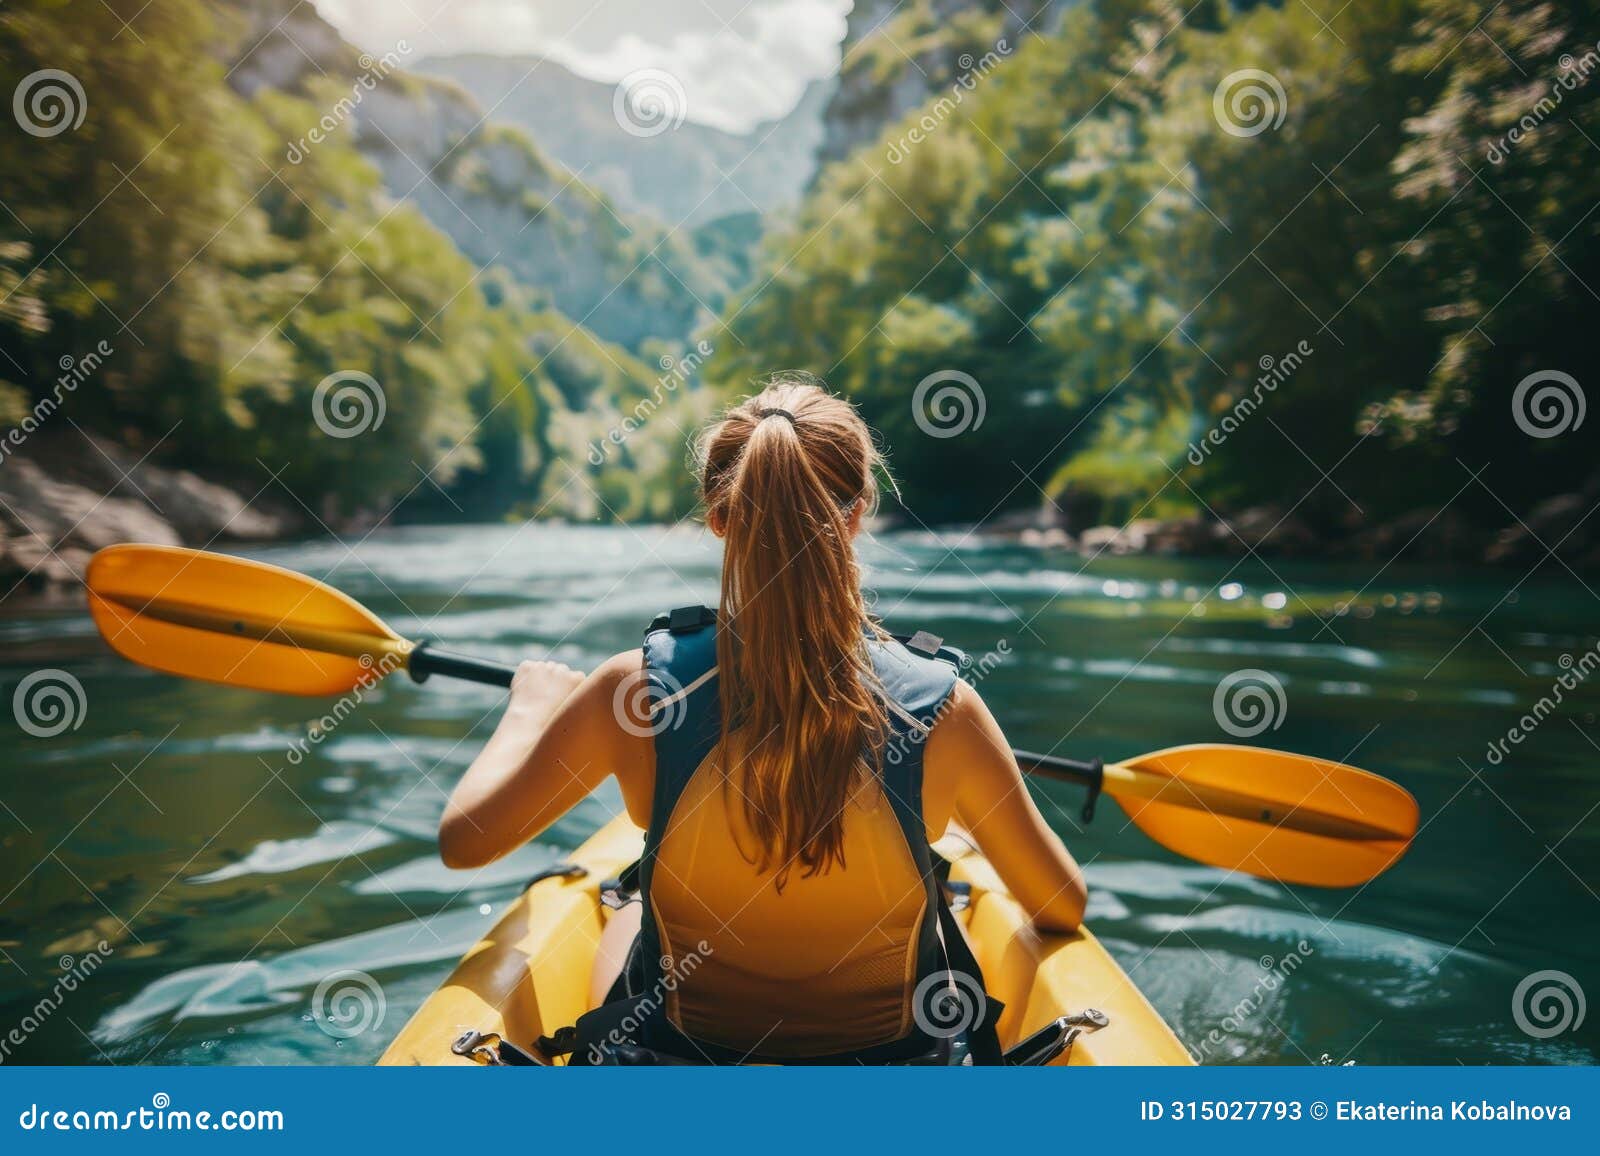 solo female kayaker in picturesque river, serene summer scene for outdoor adventure seekers